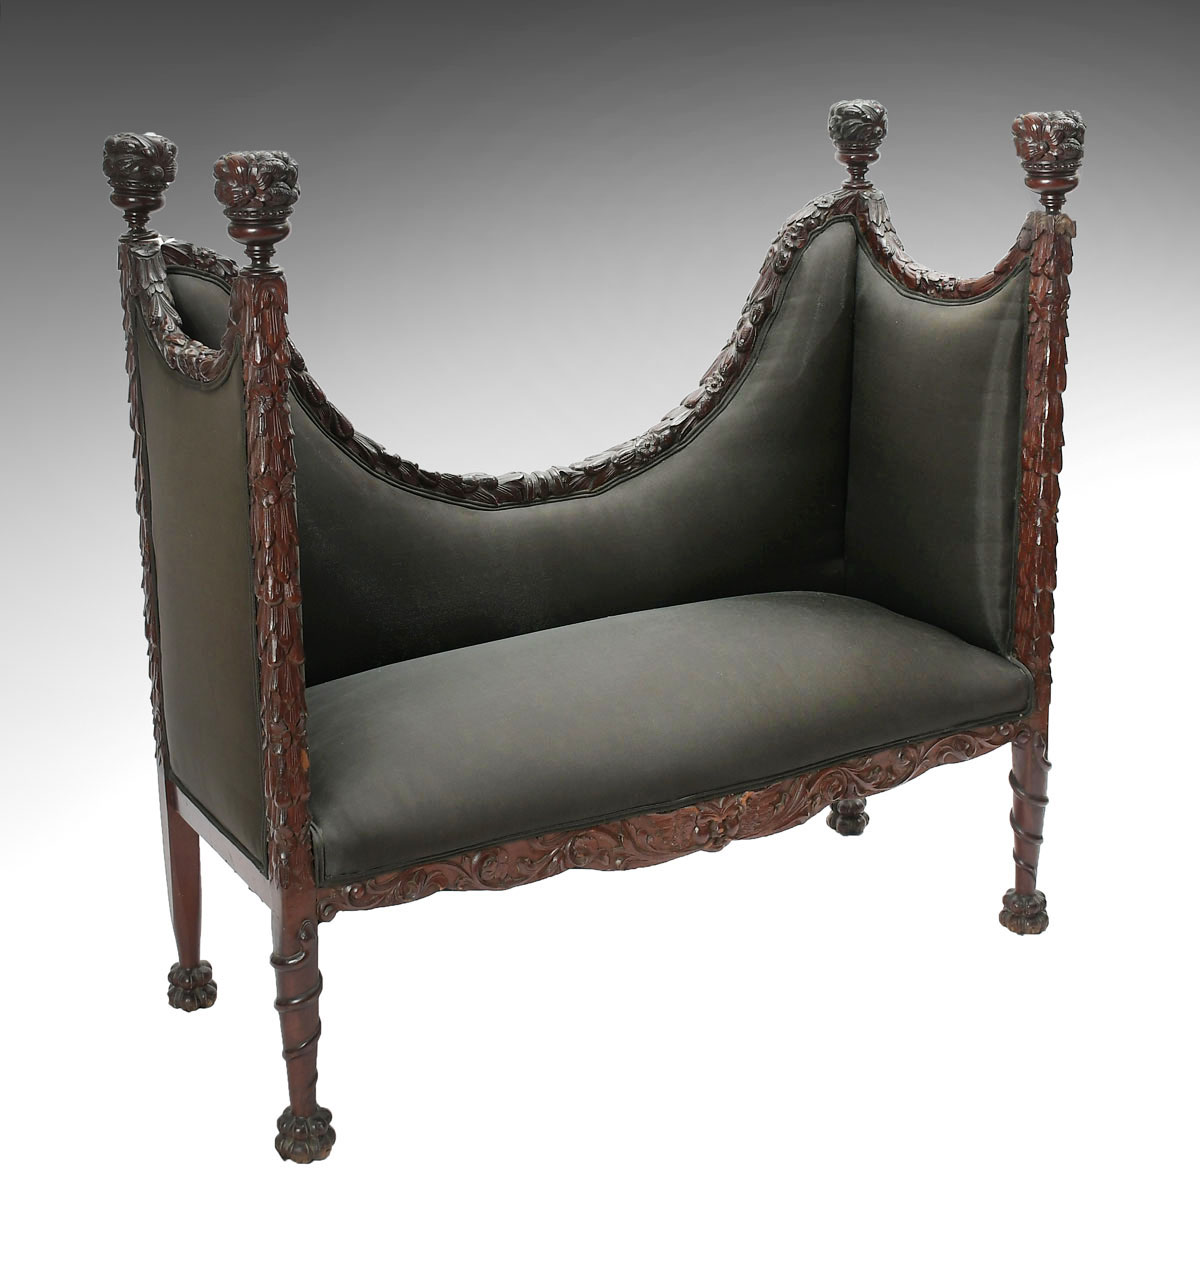 HEAVILY CARVED HIGH BACK BENCH: